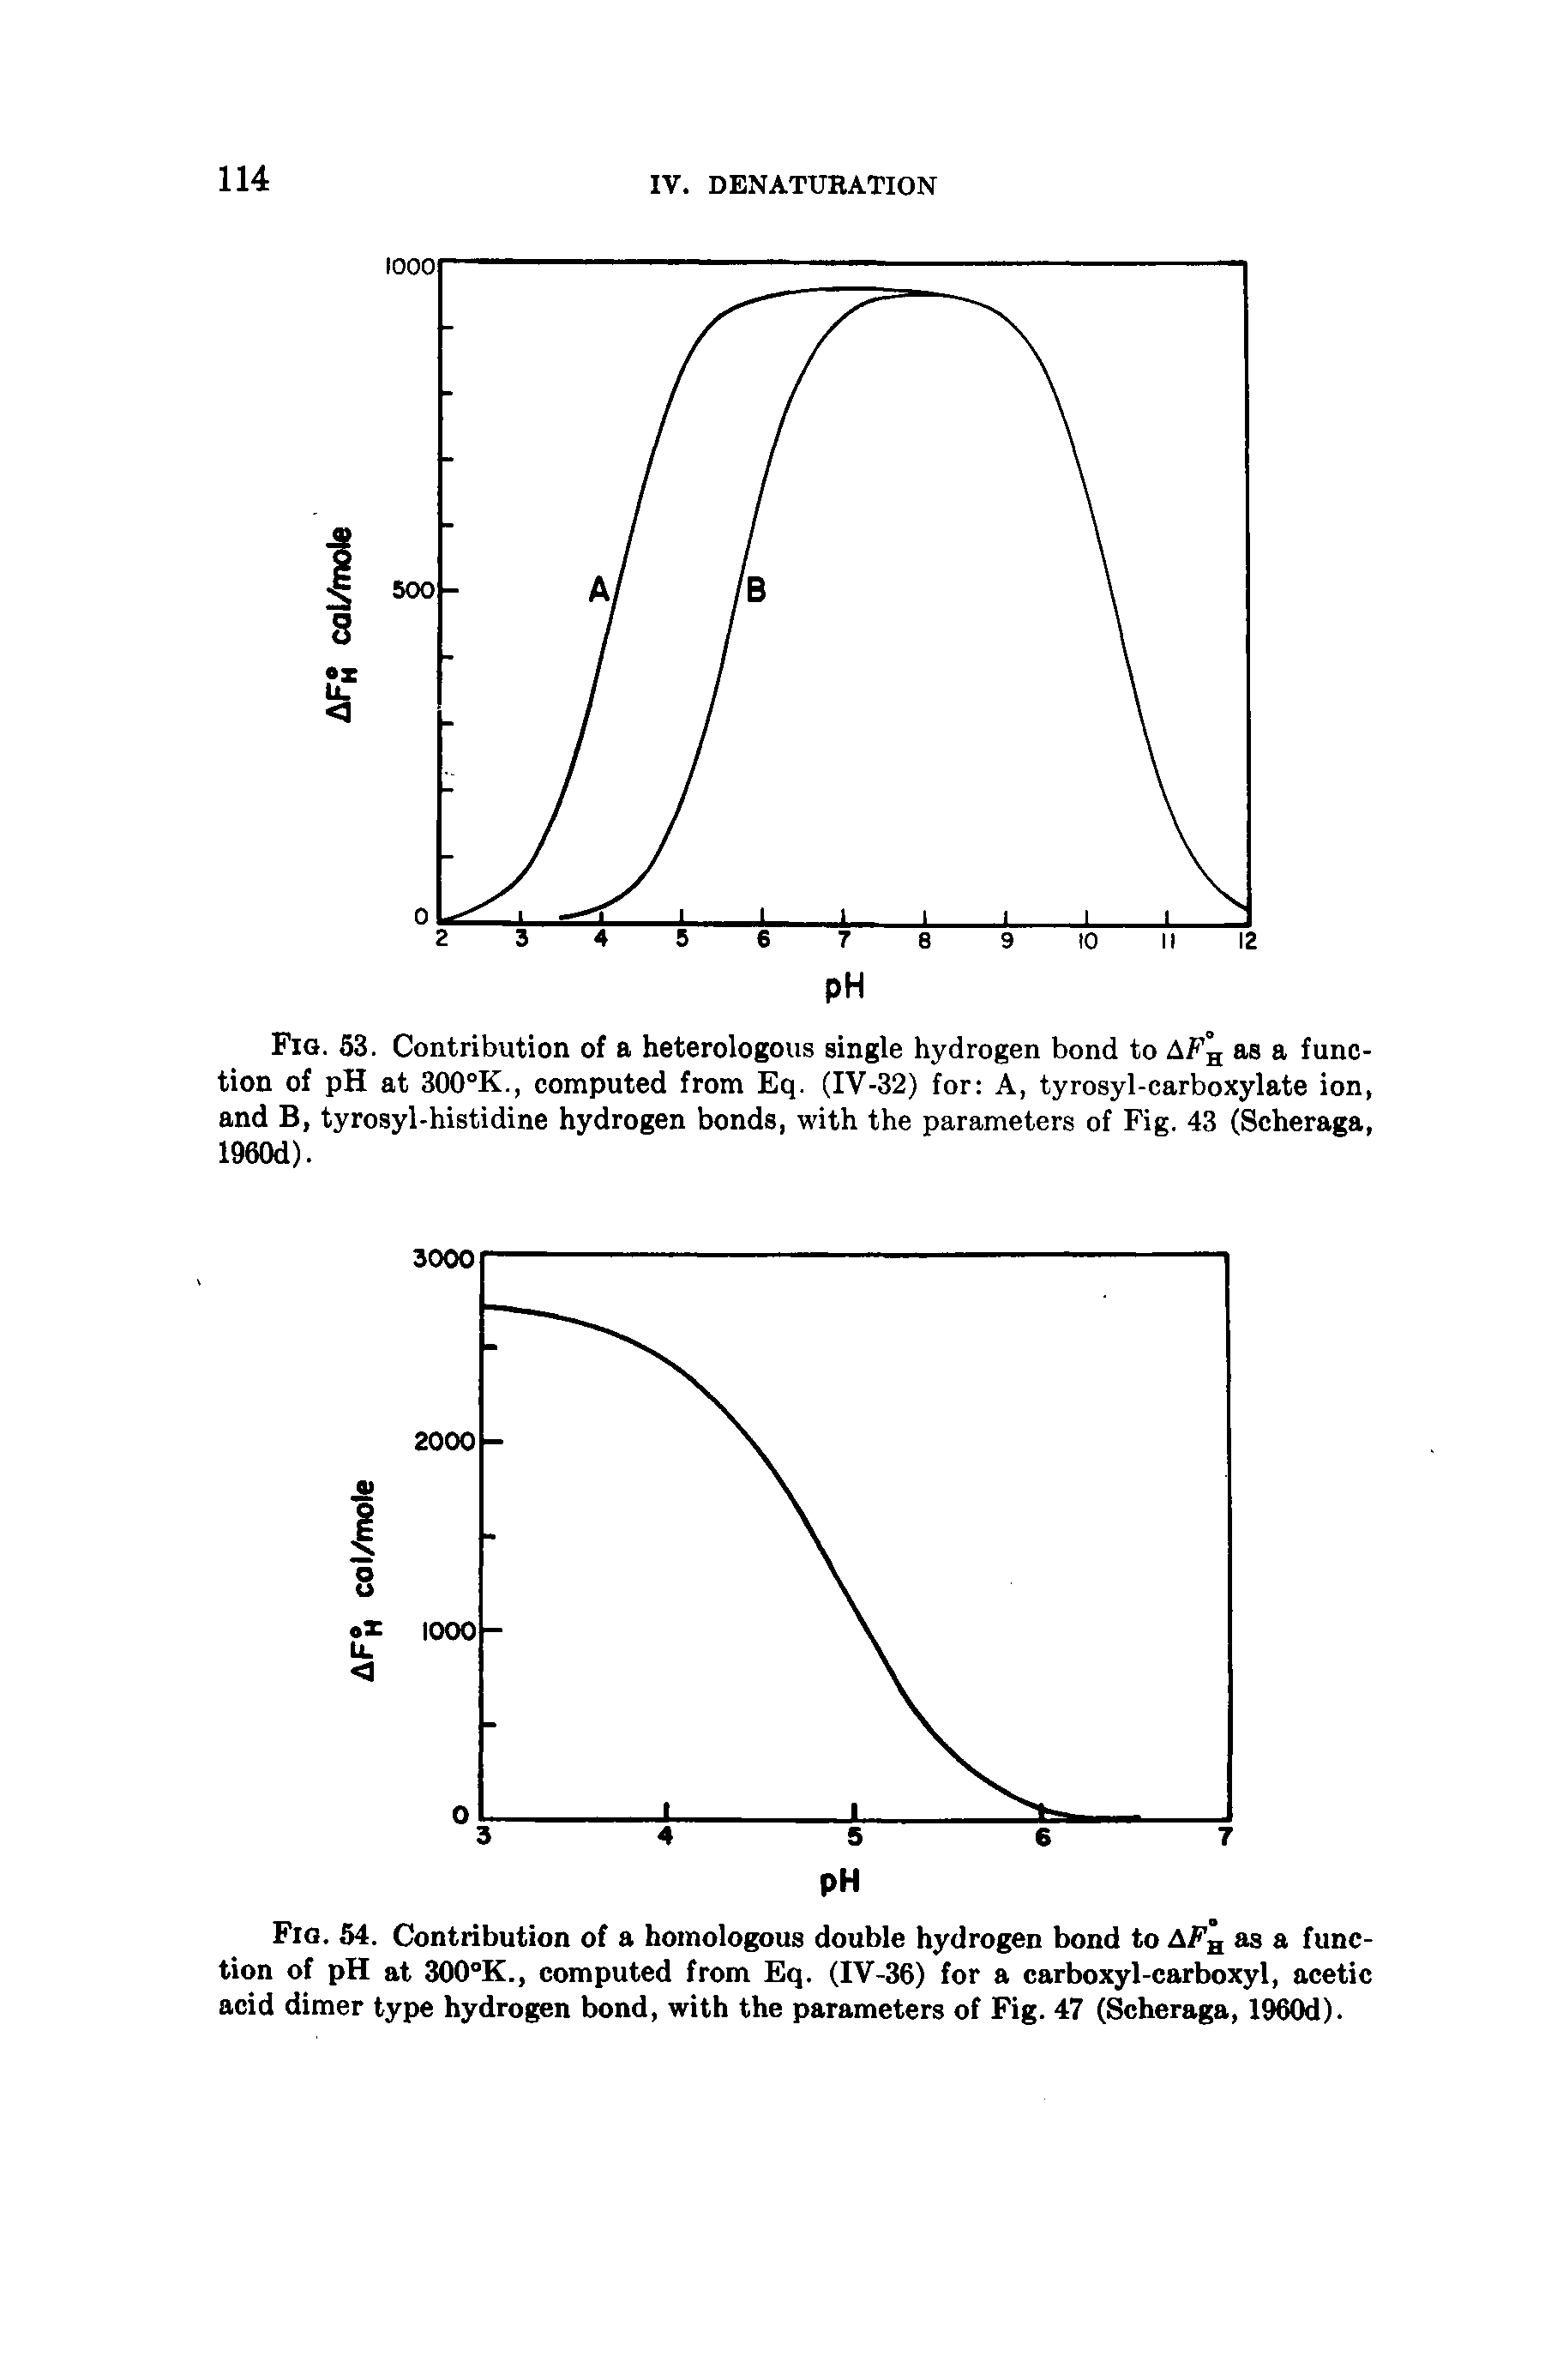 Fig. 54. Contribution of a homologous double hydrogen bond to AFg as a function of pH at 300 K., computed from Eq. (IV-36) for a carboxyl-carboxyl, acetic acid dimer type hydrogen bond, with the parameters of Fig. 47 (Scheraga, 1960d).